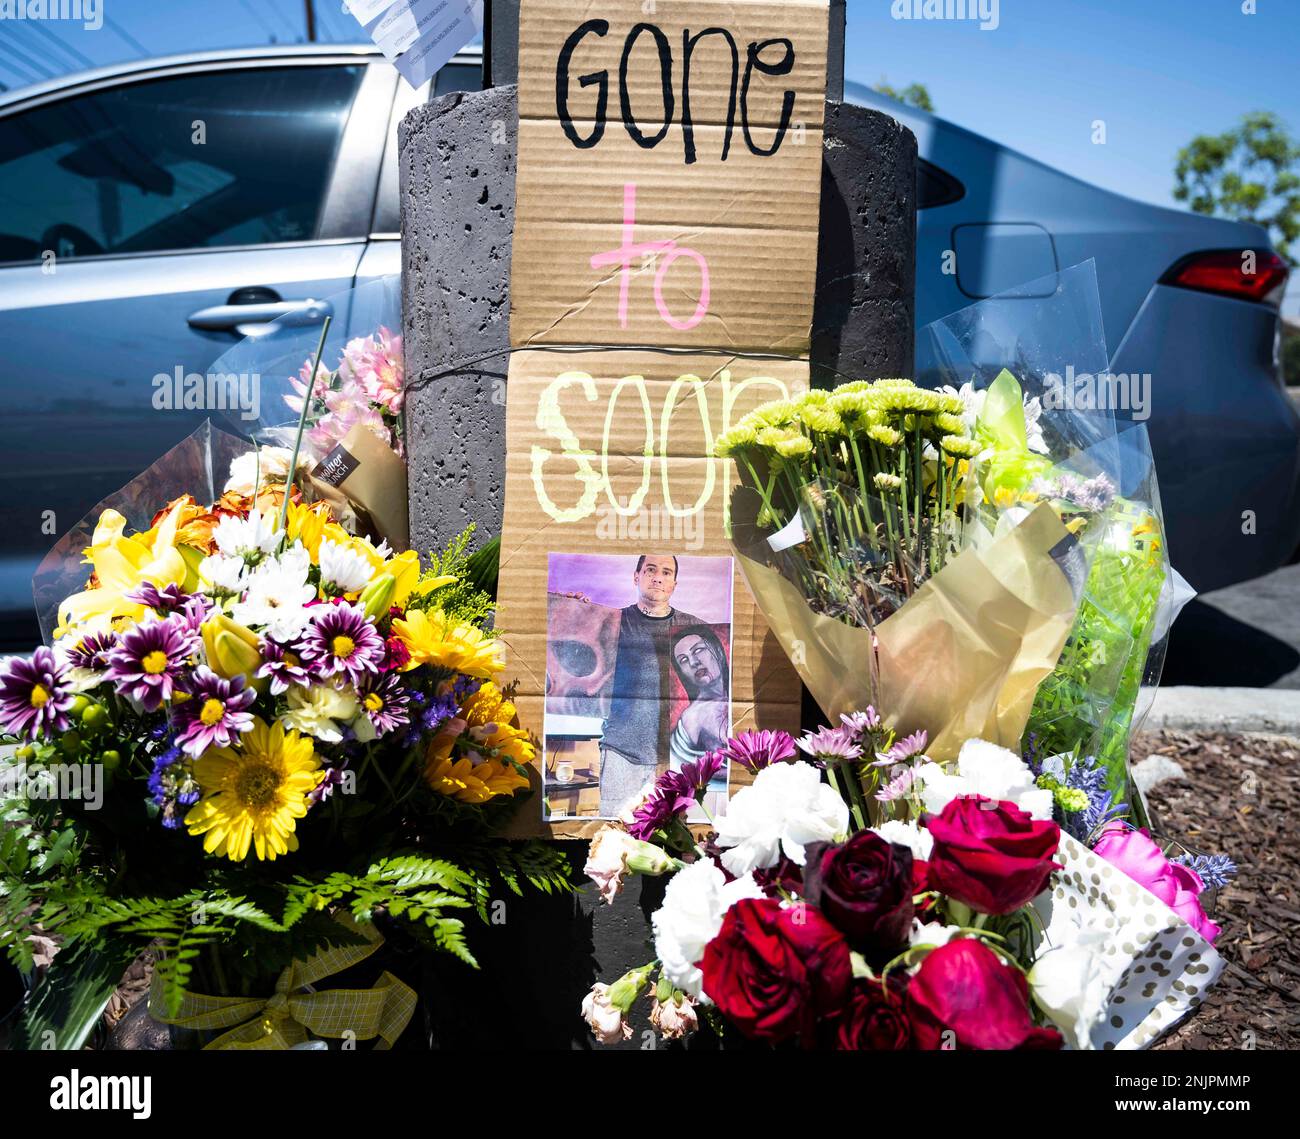 FILE - Flowers, candles and cards have been left at the parking lot of the 7 -Eleven store on W. Lambert Road in Brea, Calif., Thursday, July 14, 2022.  Authorities said Friday, July